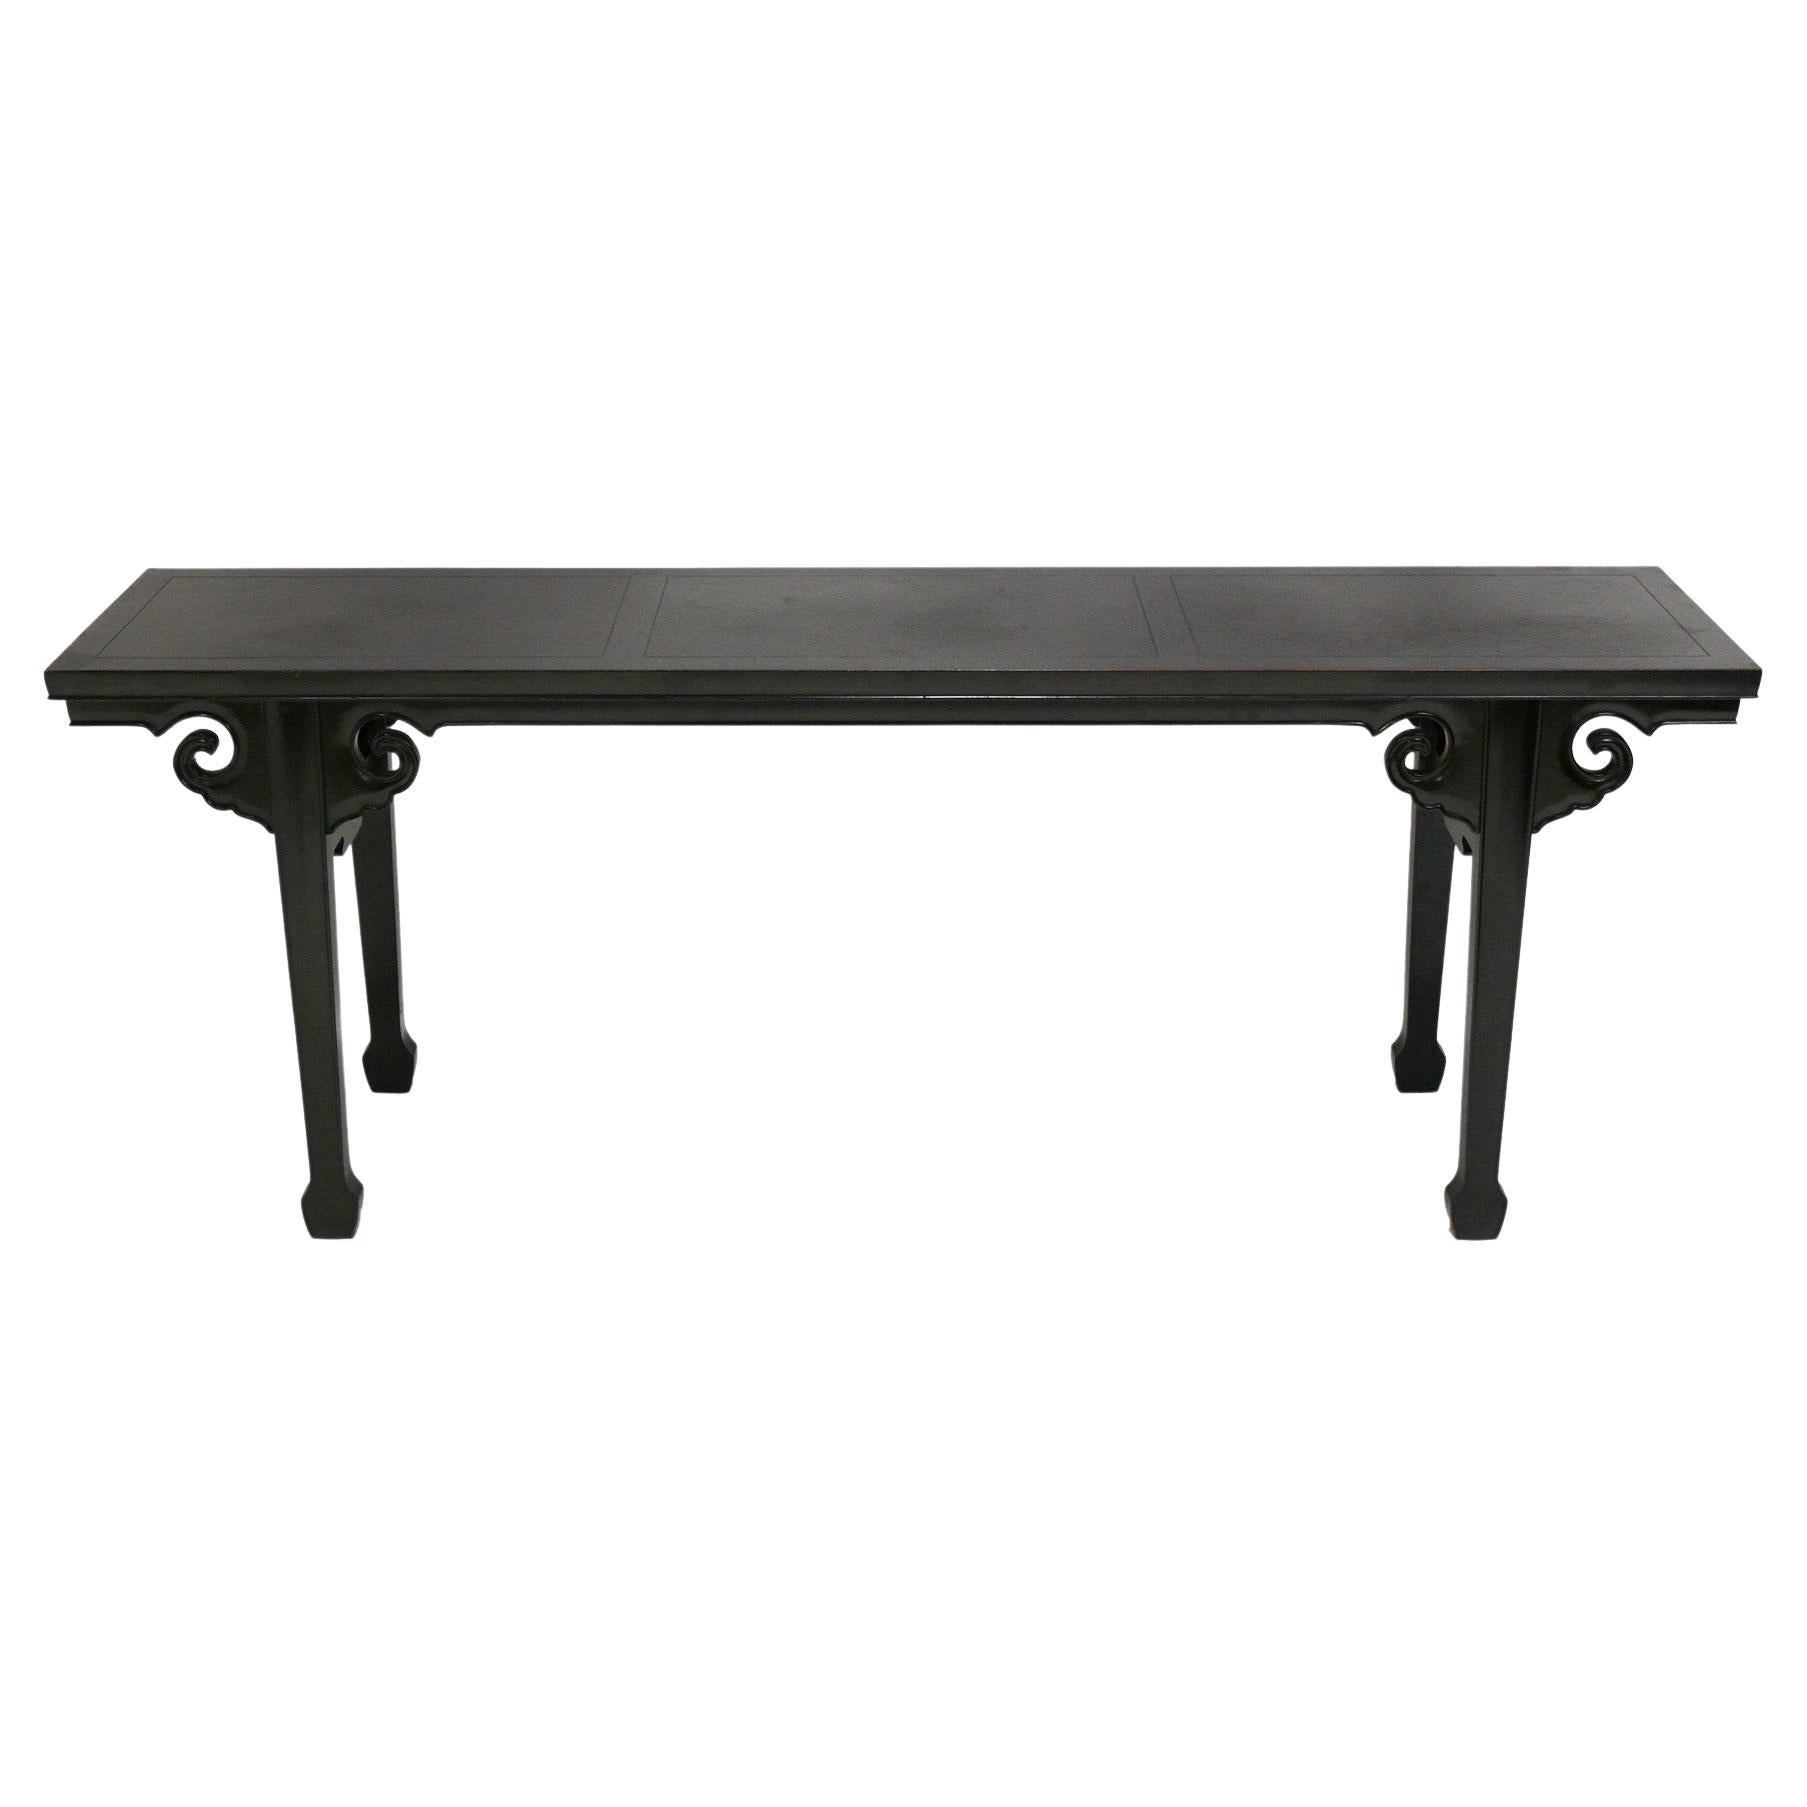 Asian Inspired Console Table by Michael Taylor for Baker In Your Choice of Color